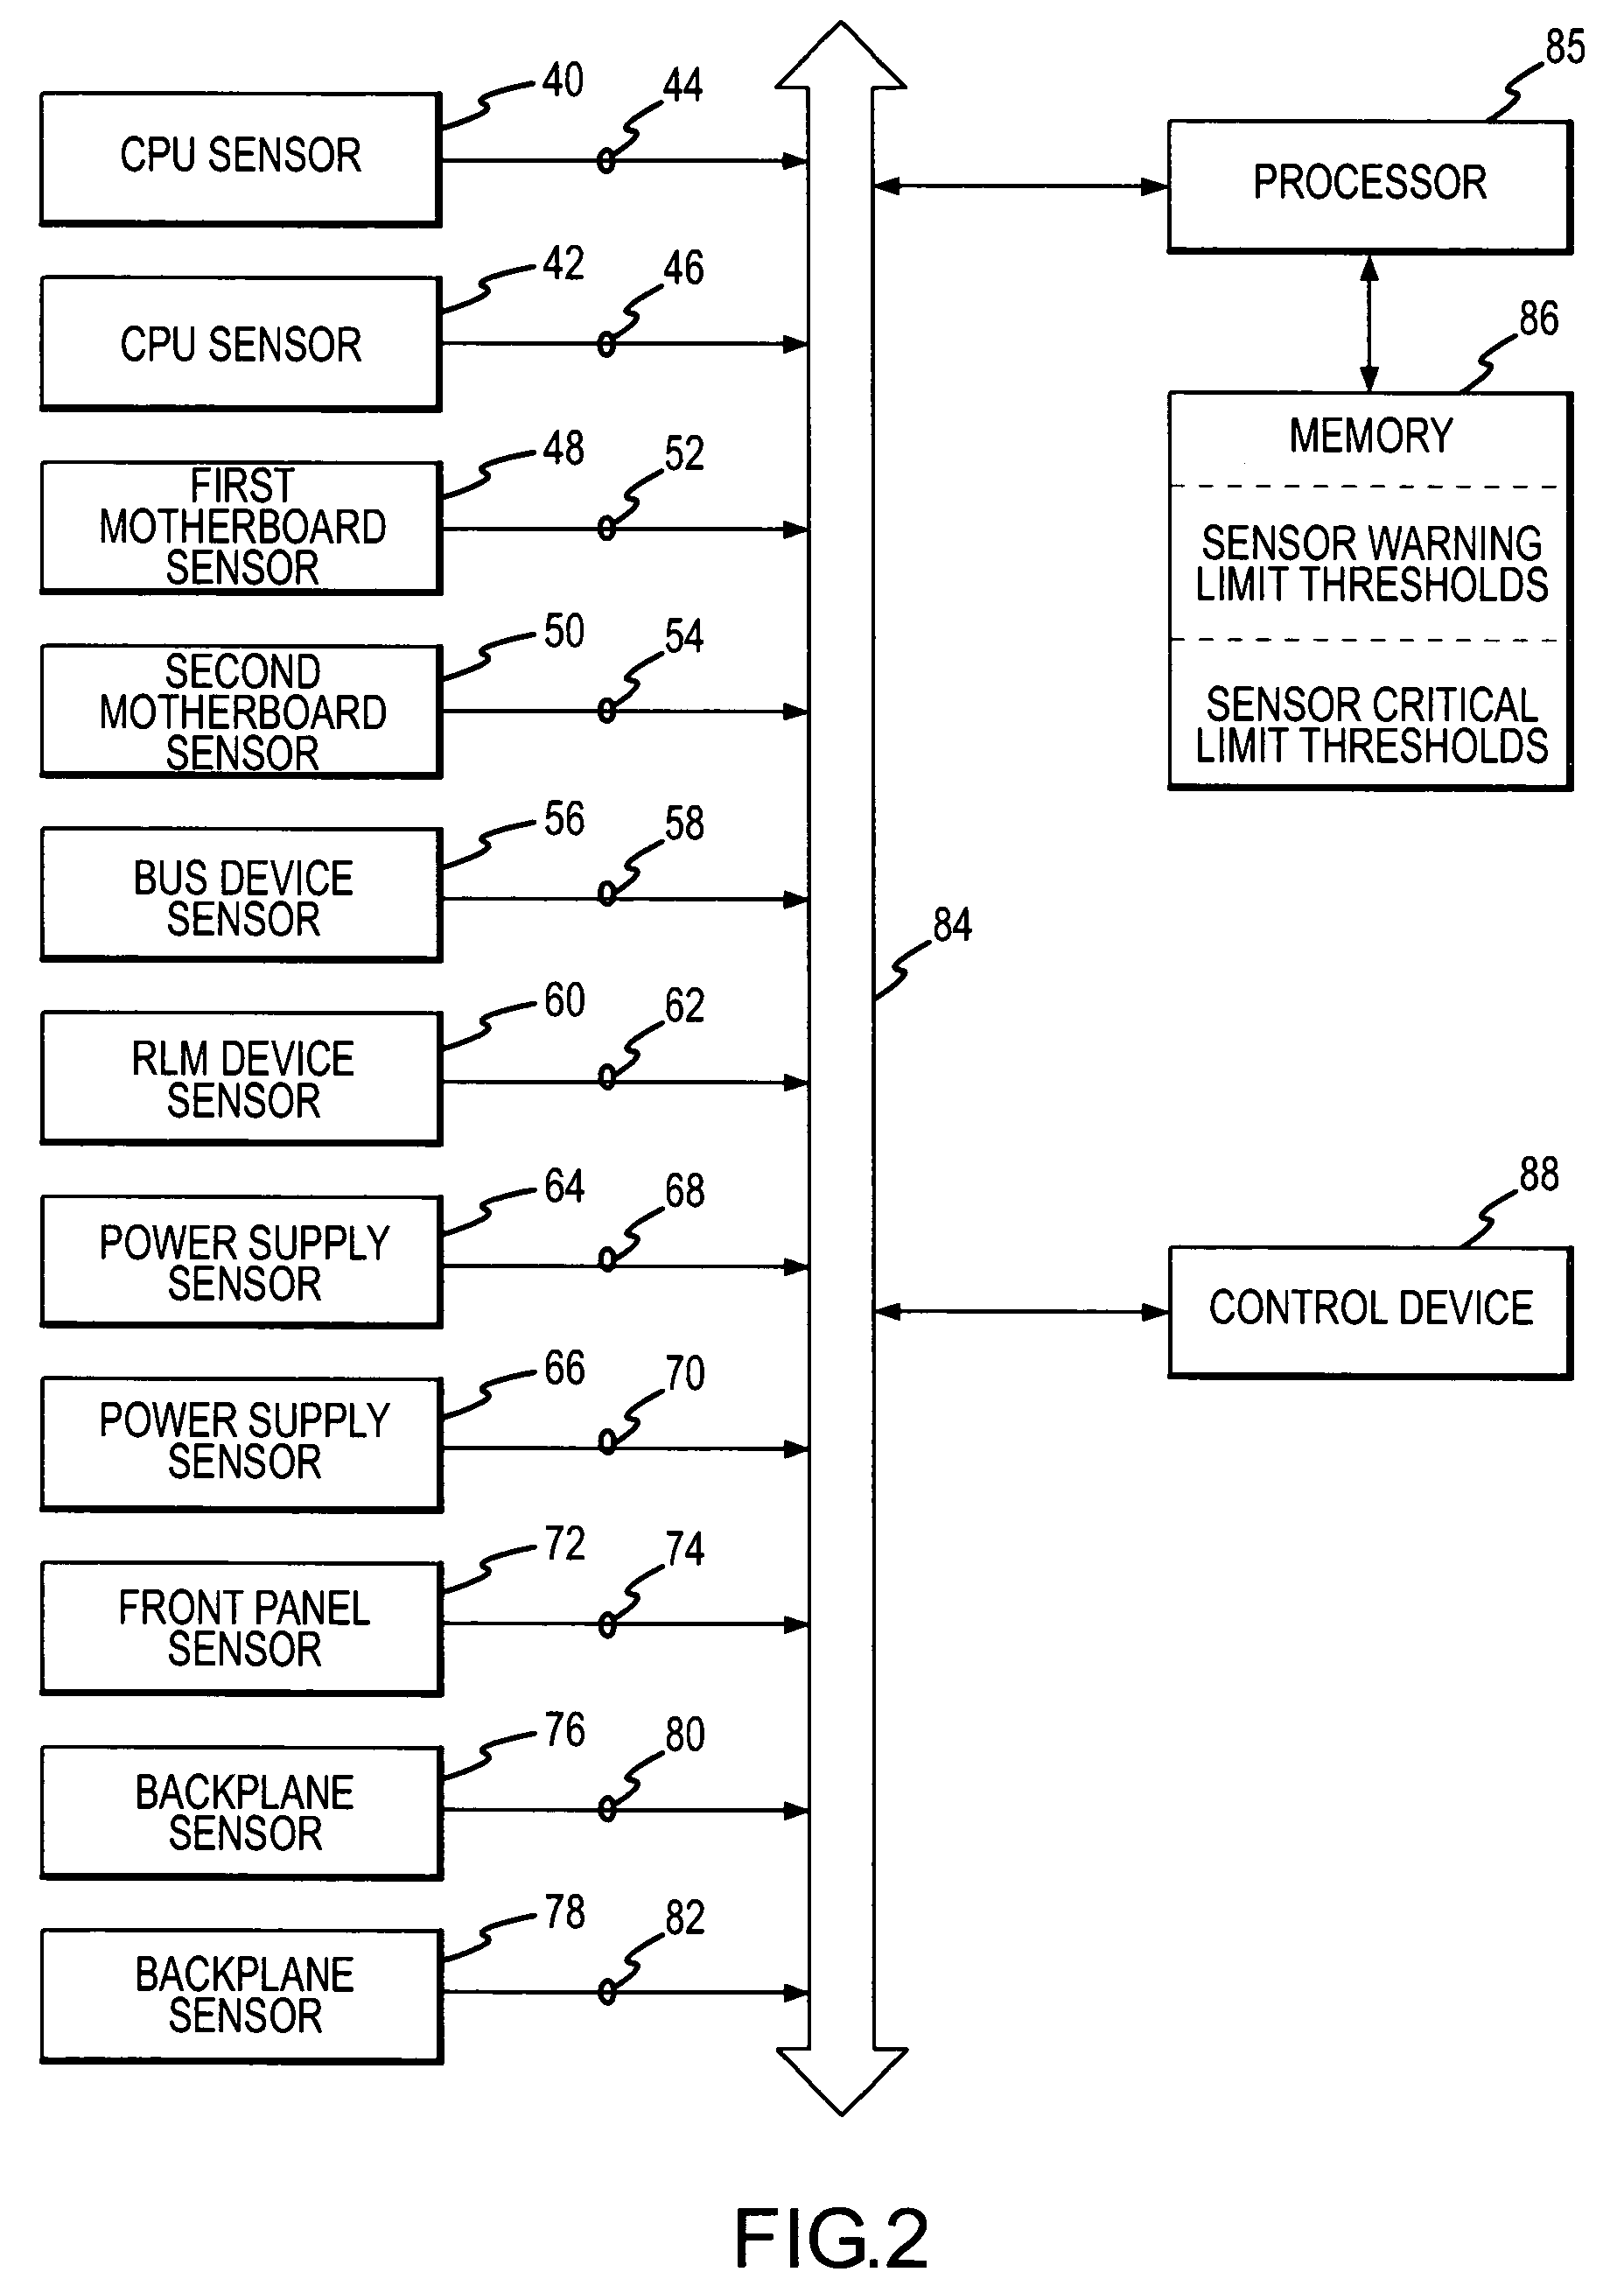 Thermal monitoring and response apparatus and method for computer unit